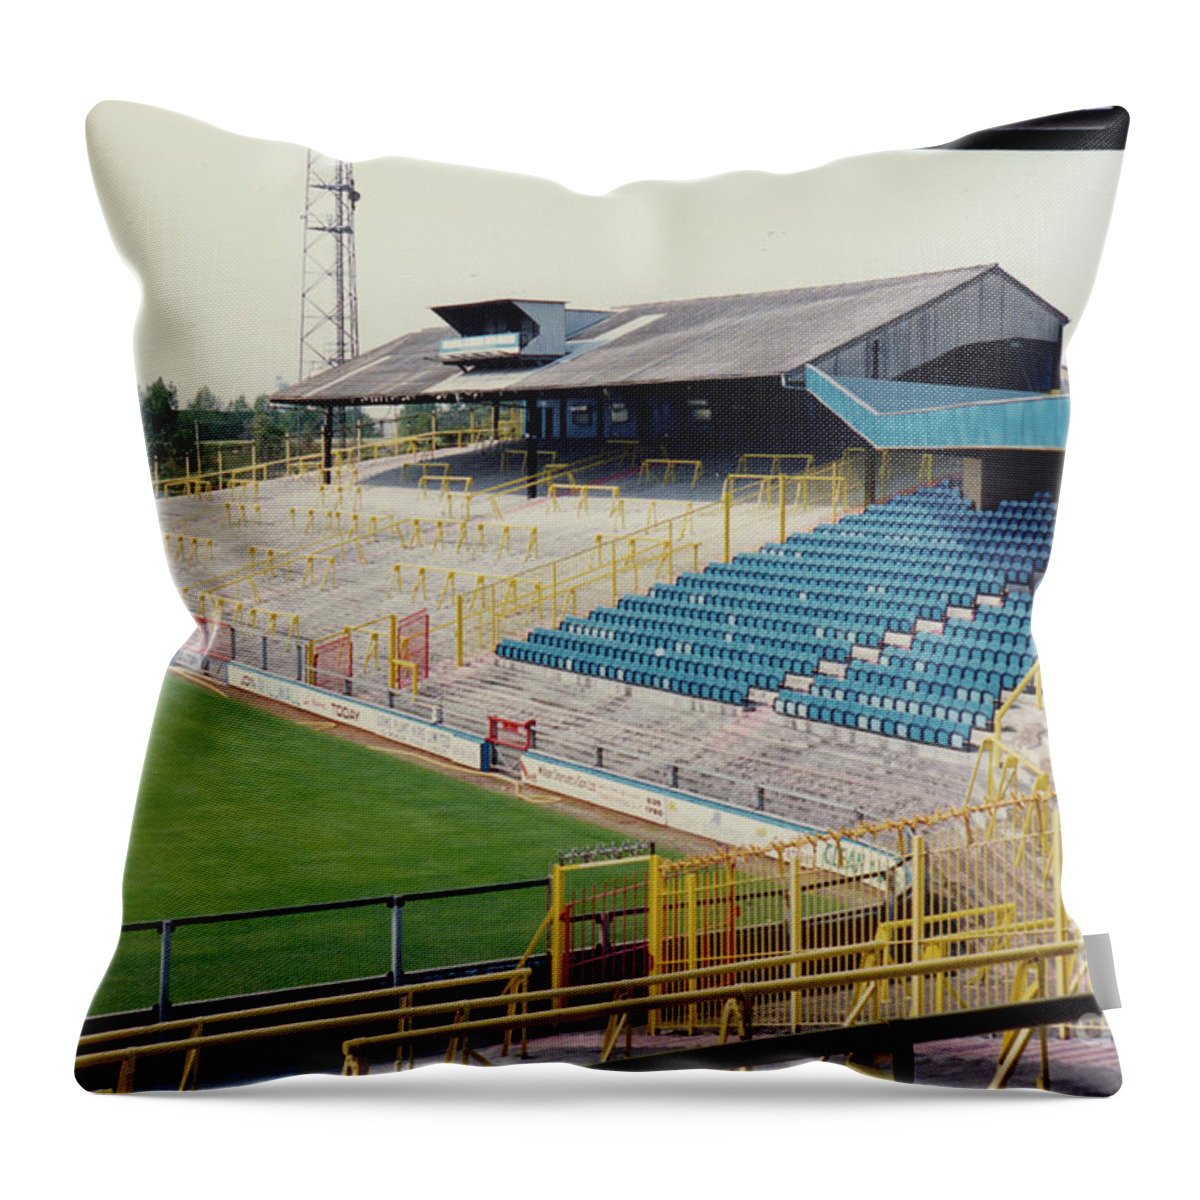  Throw Pillow featuring the photograph Millwall - The Den - North Terrace The Halfway 2 - Leitch - July 1992 by Legendary Football Grounds